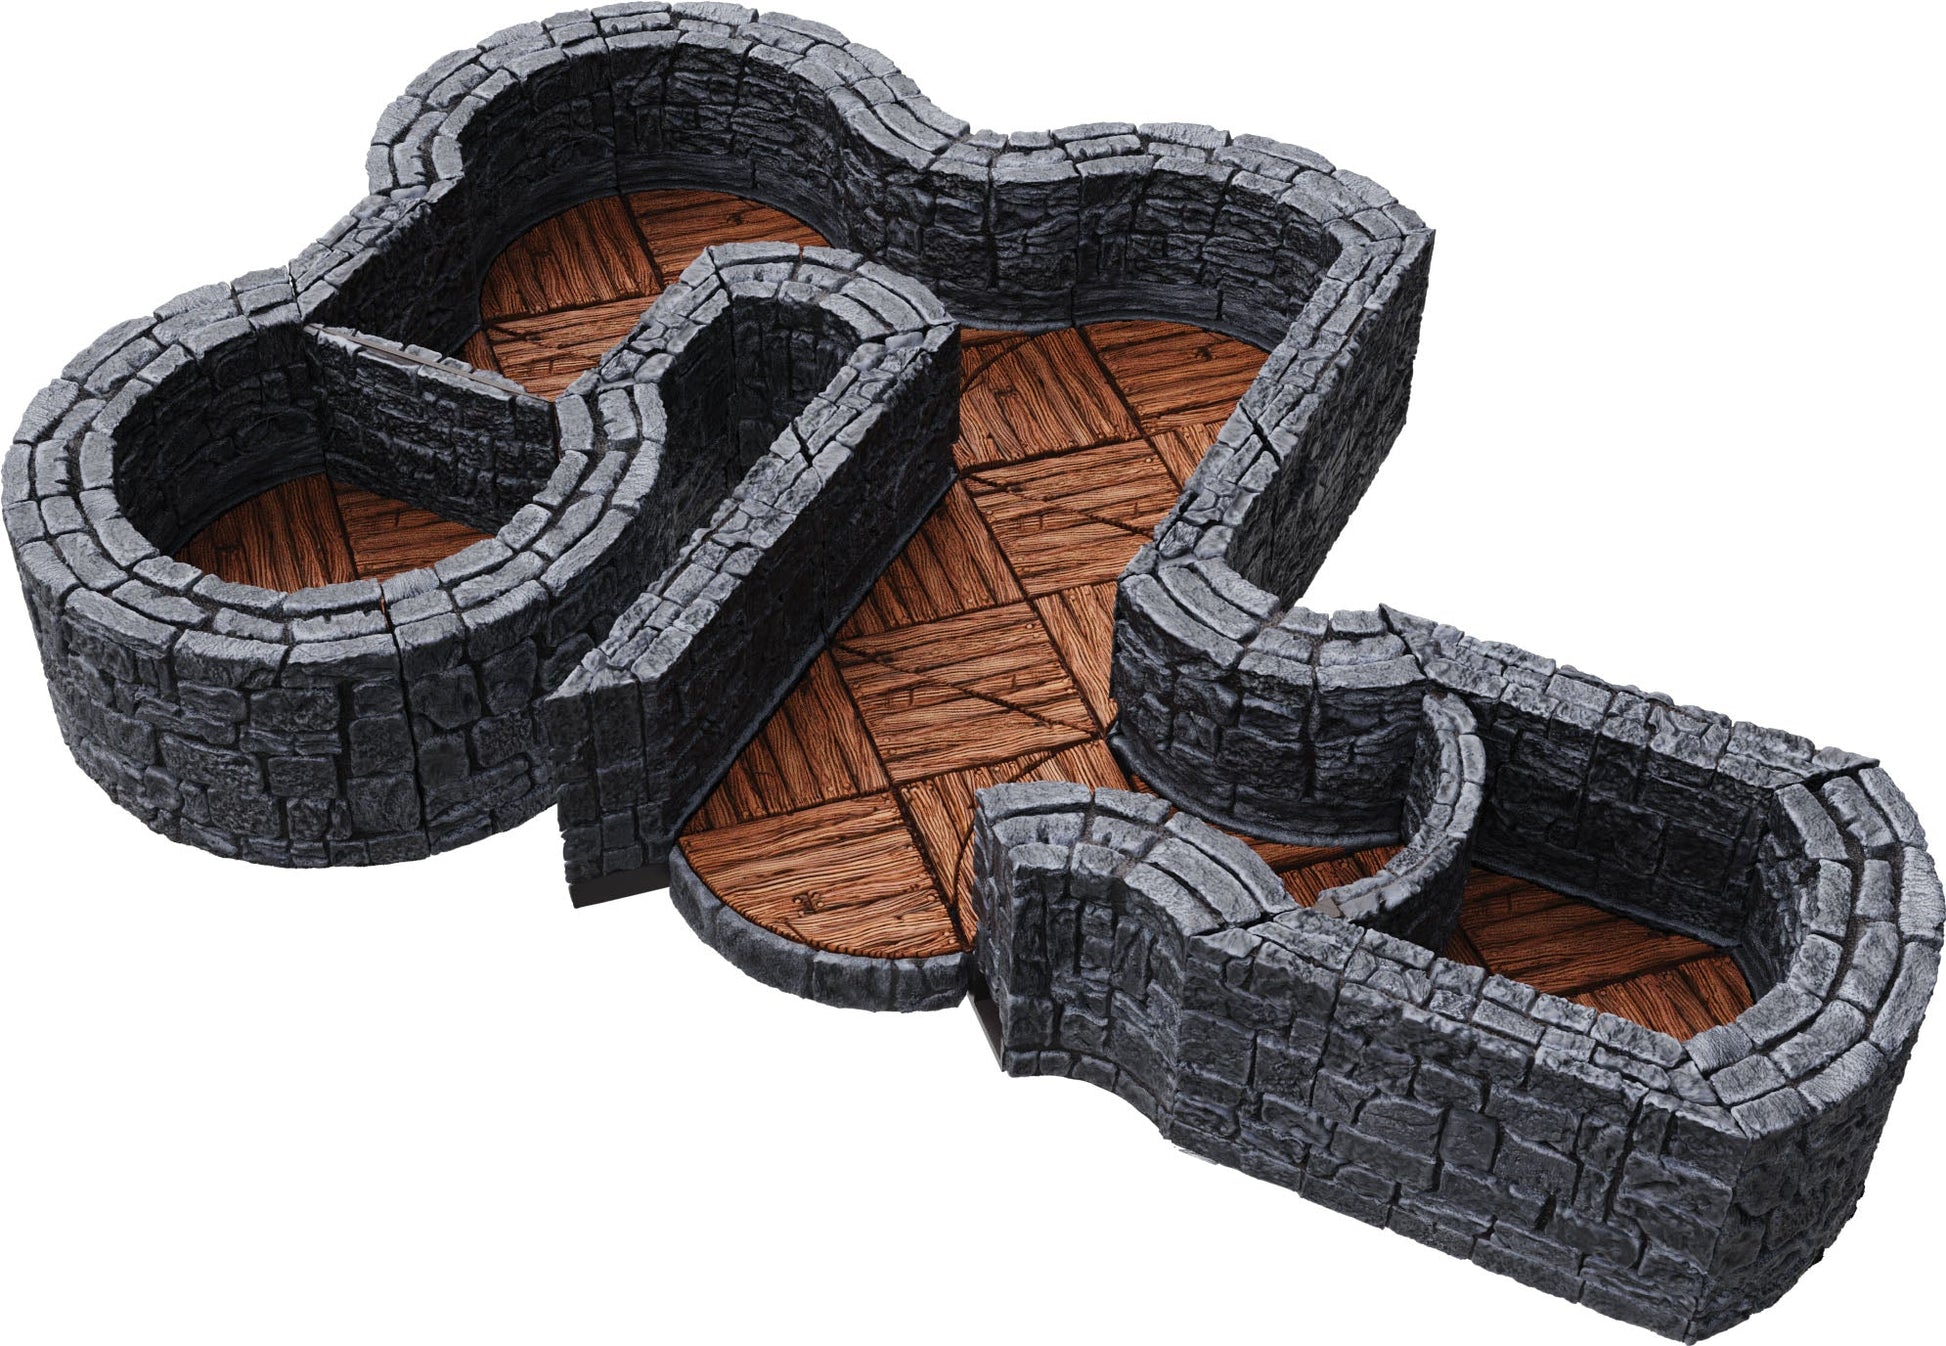 WarLock Tiles: Expansion Pack - 1 in Dungeon Angles & Curves